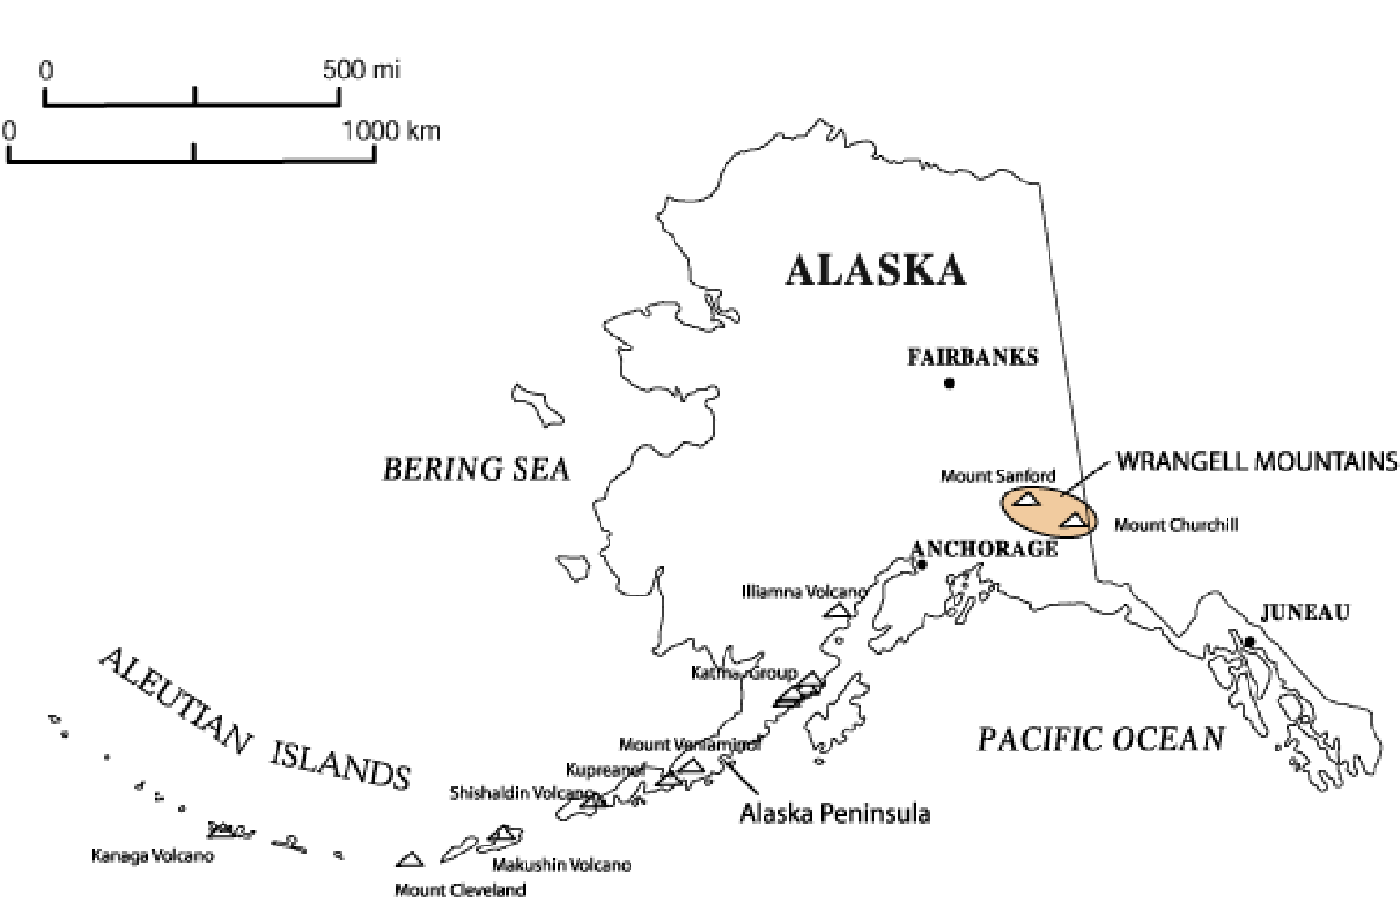 Figure 1. Locations of volcanoes mentioned in this report.